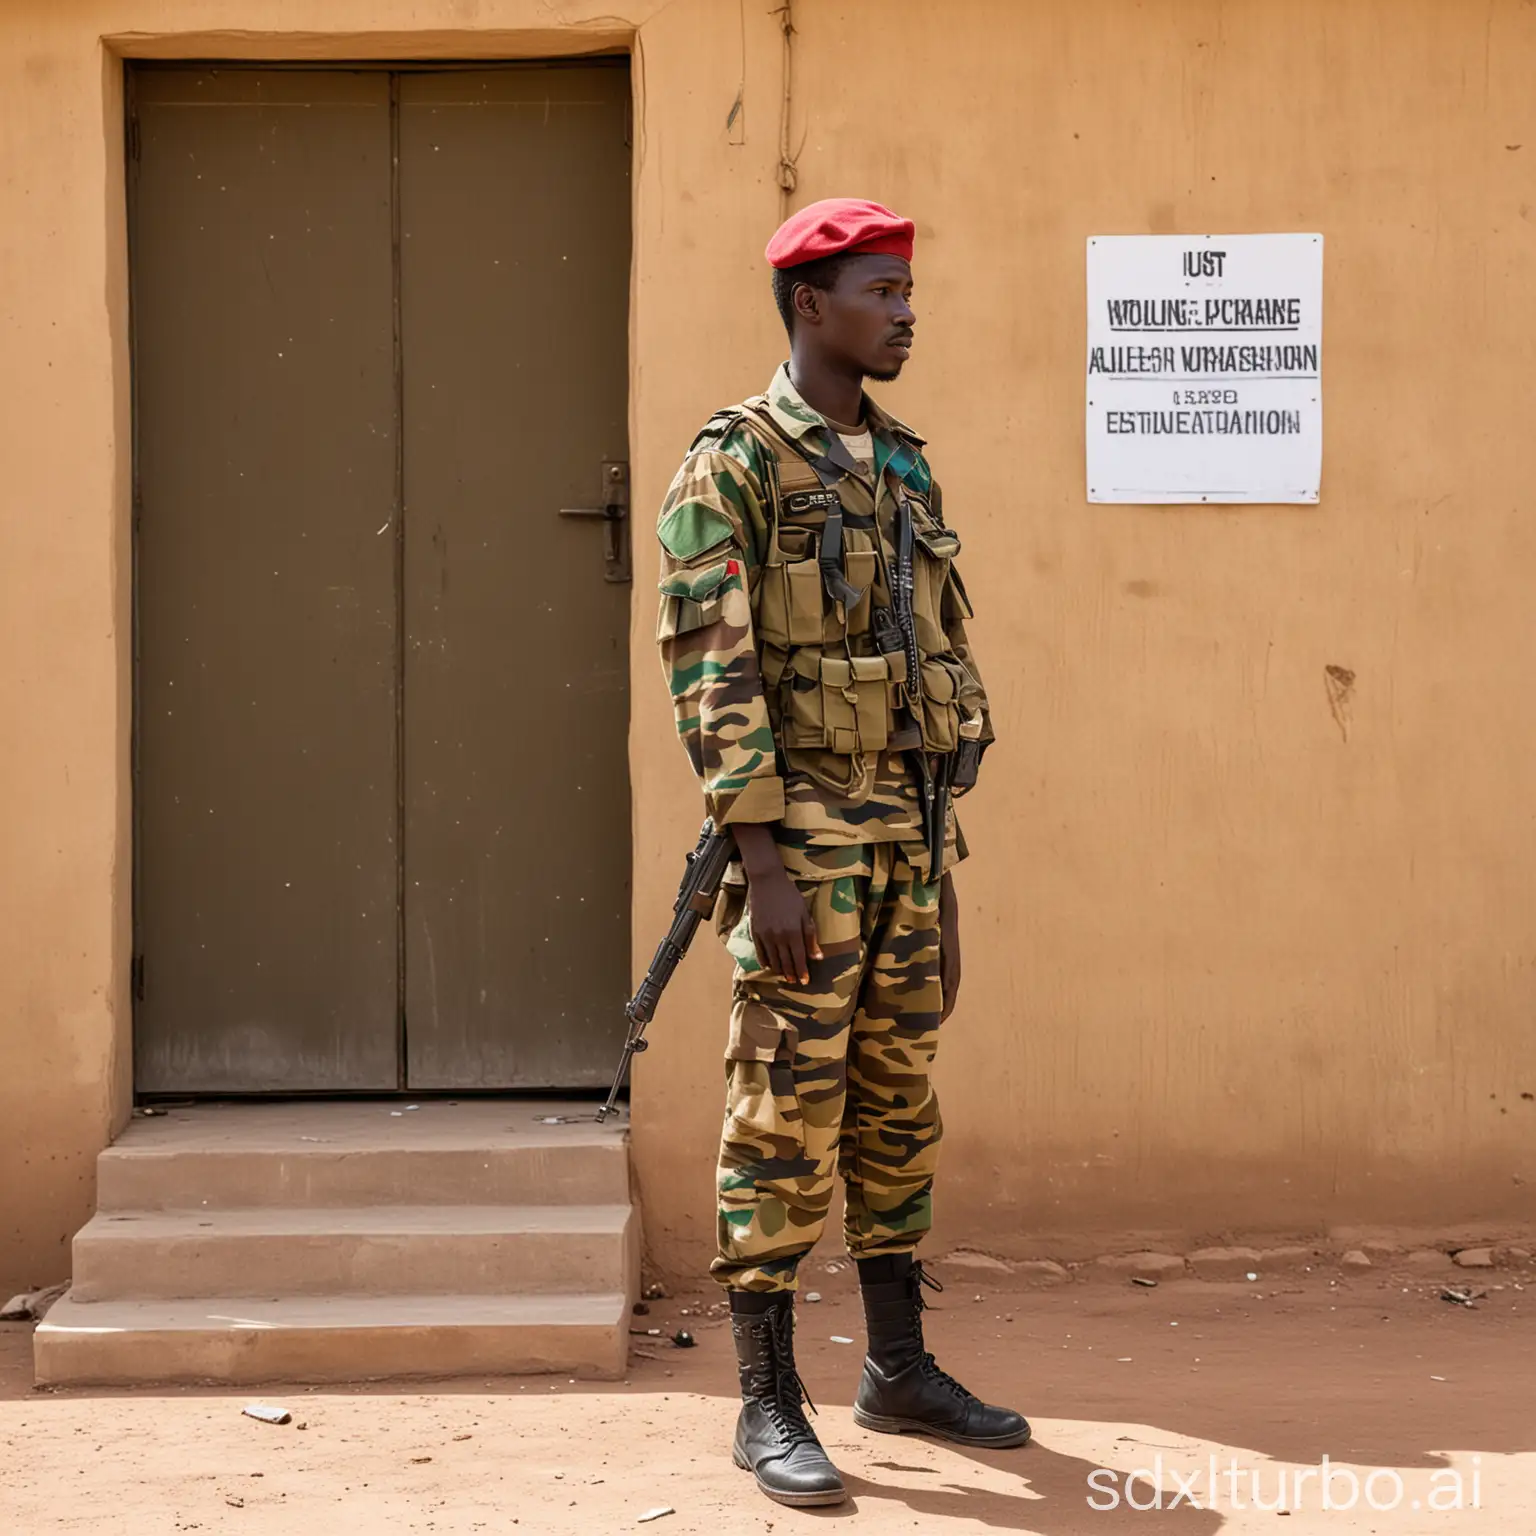 A Chadian soldier, sad and indecisive in front of the polling station.